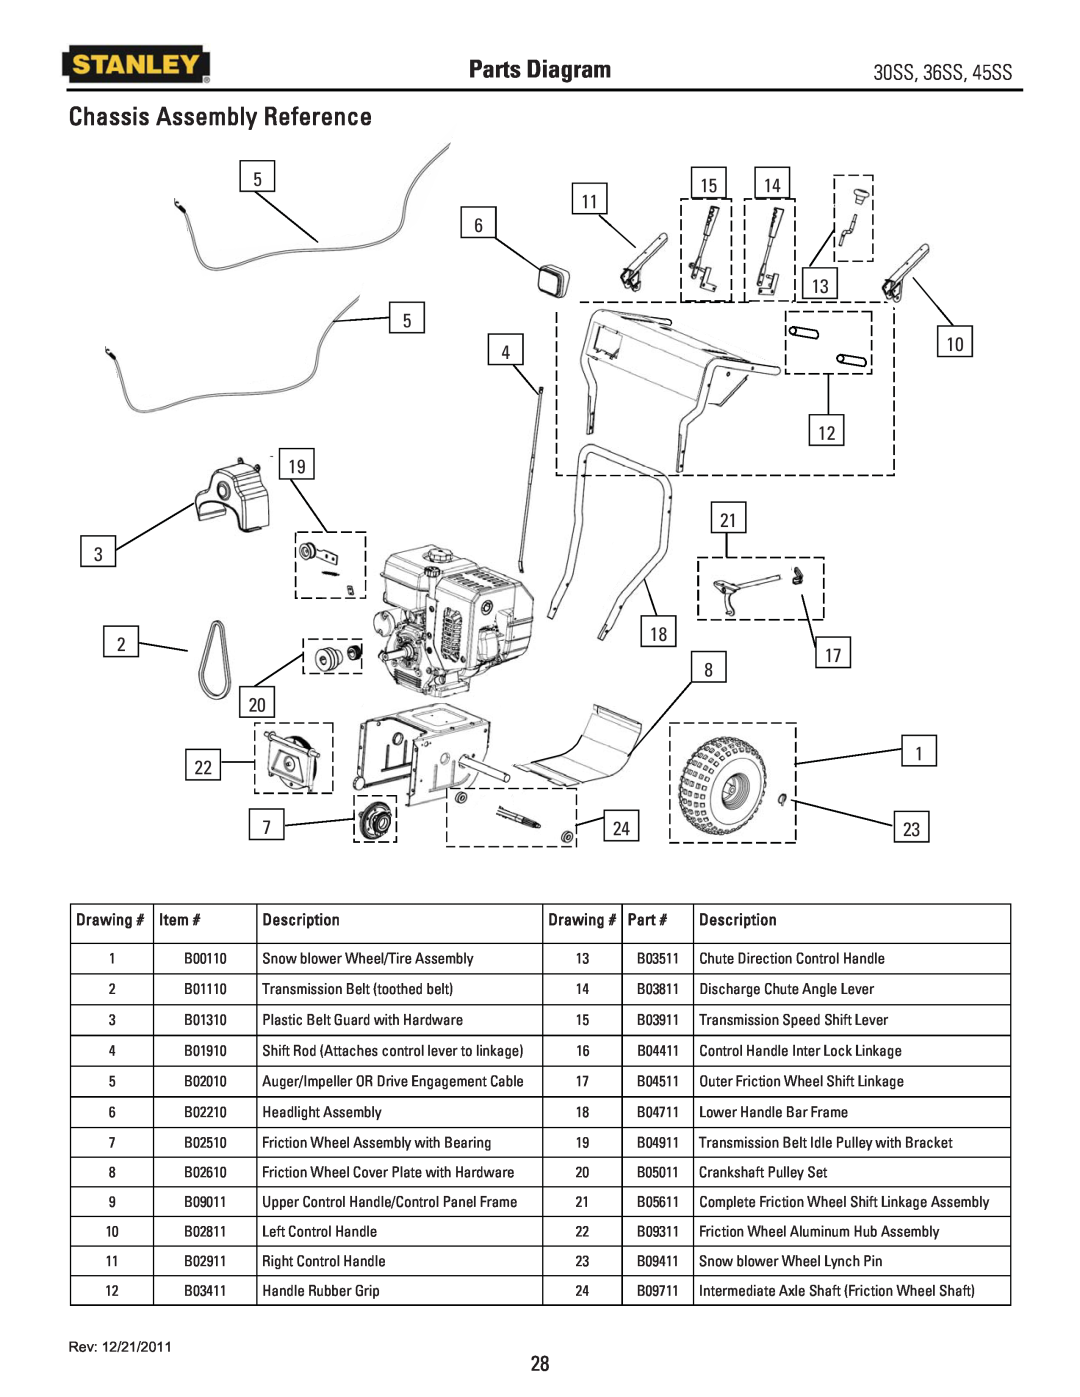 Stanley Black & Decker 36SS, 30SS, 45SS Parts Diagram, Chassis Assembly Reference, Item #, Description, Drawing # 